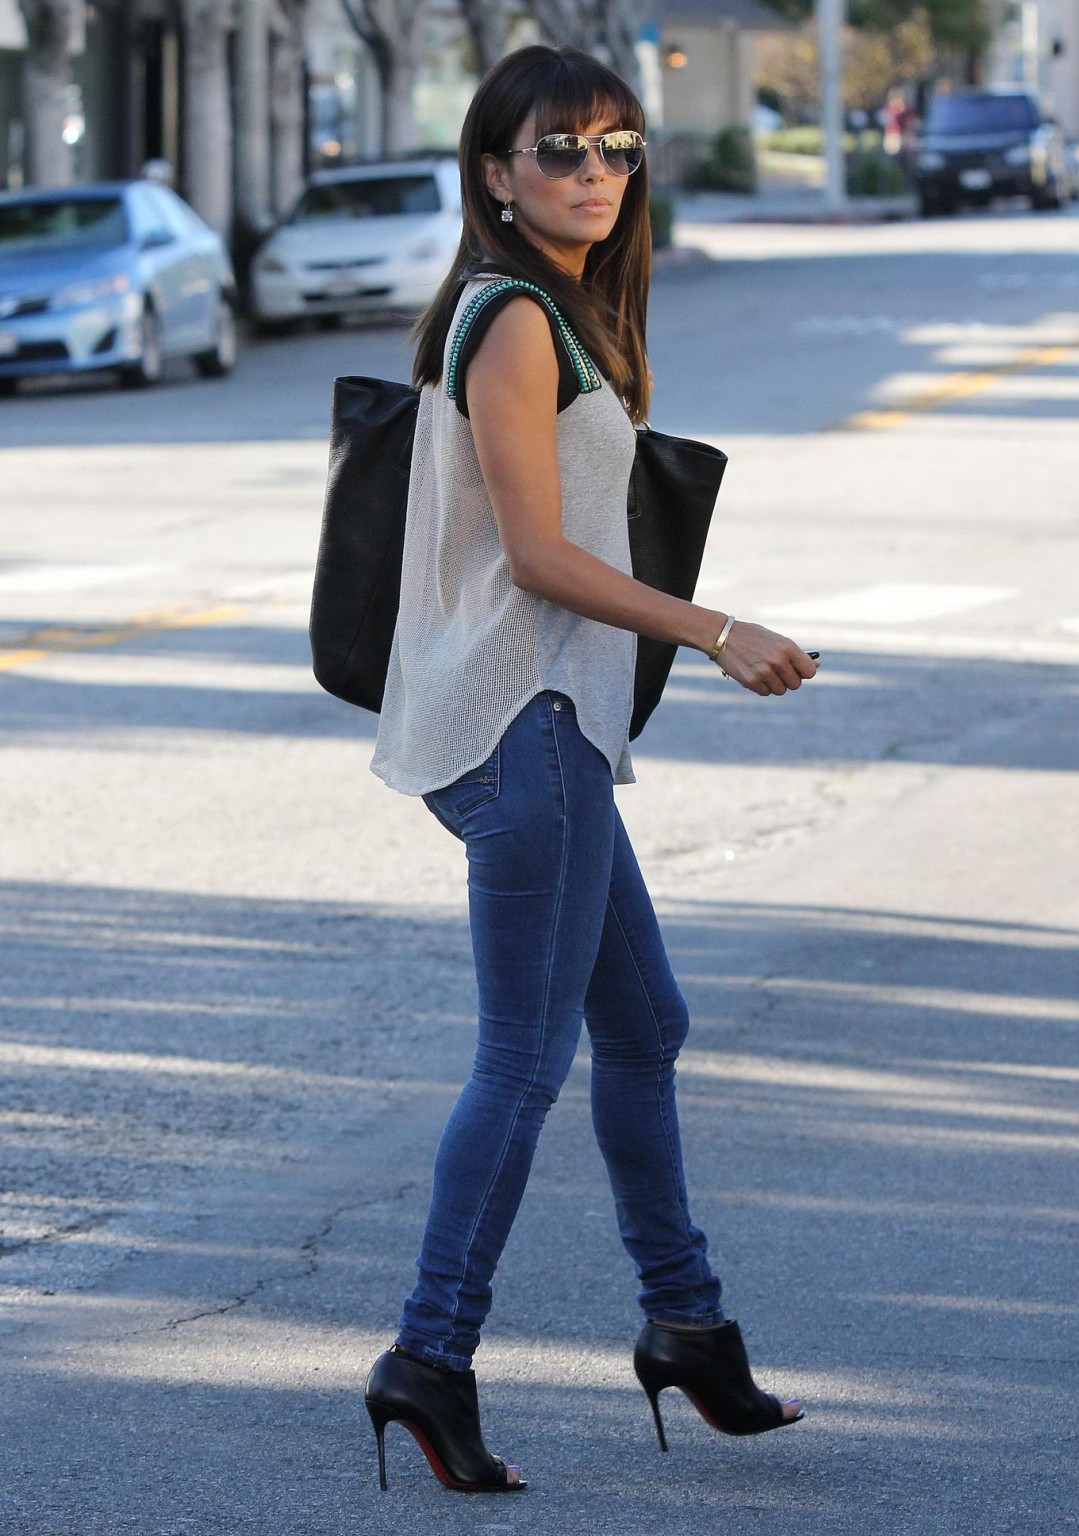 Eva Longoria shows off her ass in tight jeans at Ralphs in LA #75199581